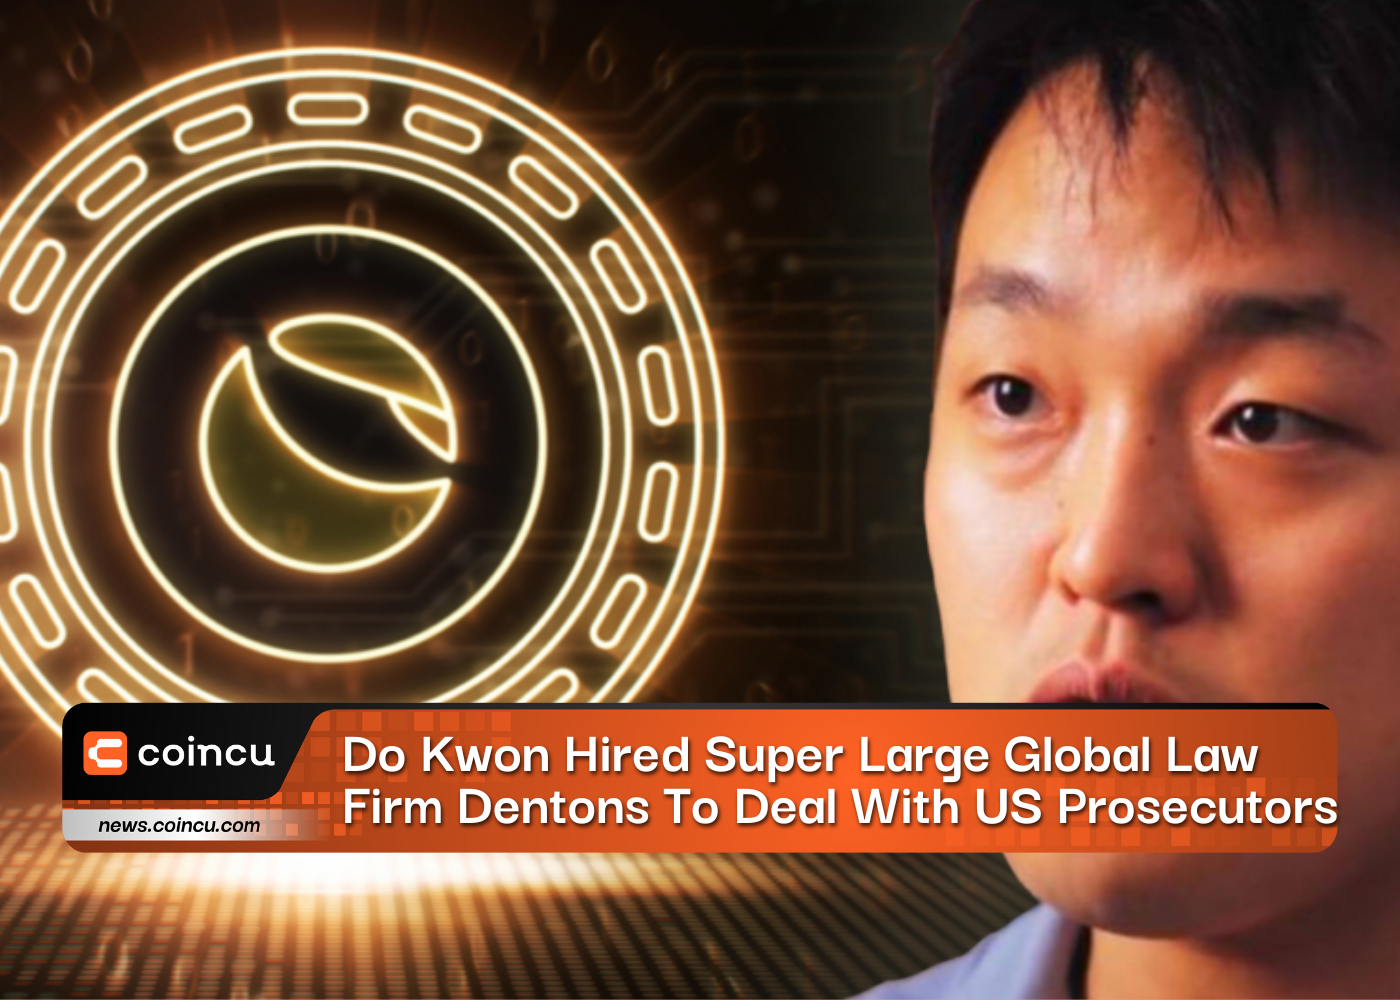 Do Kwon Hired Super Large Global Law Firm Dentons To Deal With US Prosecutors